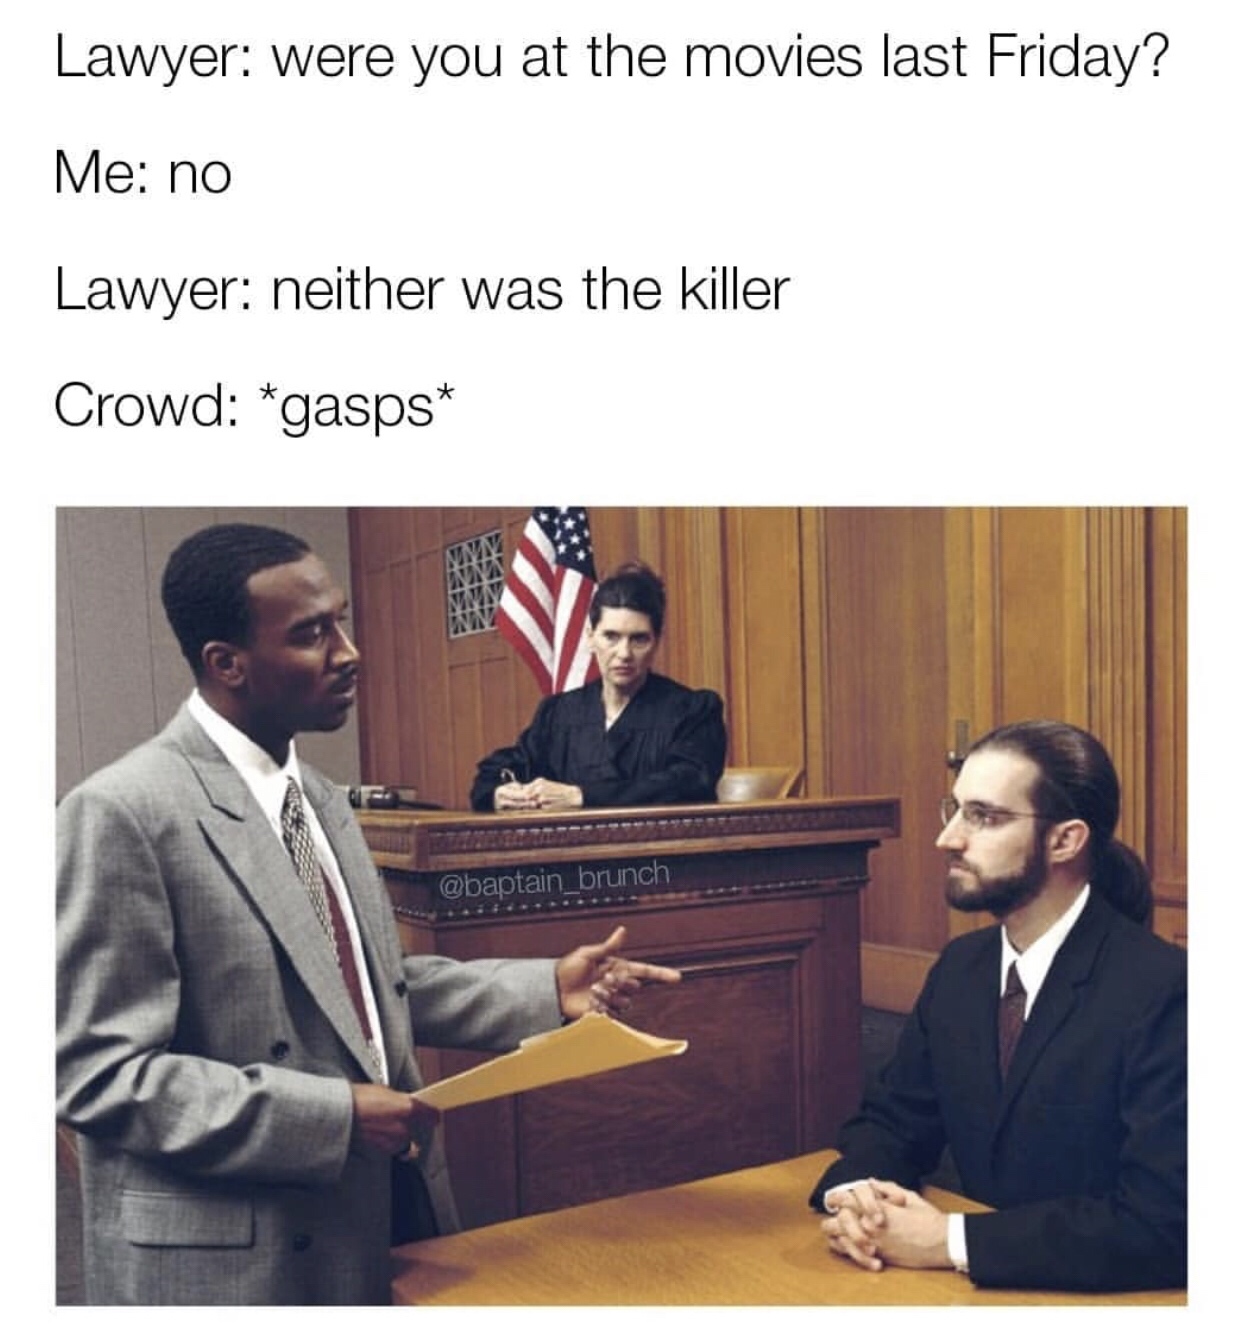 lawyer memes - Lawyer were you at the movies last Friday? Me no Lawyer neither was the killer Crowd gasps